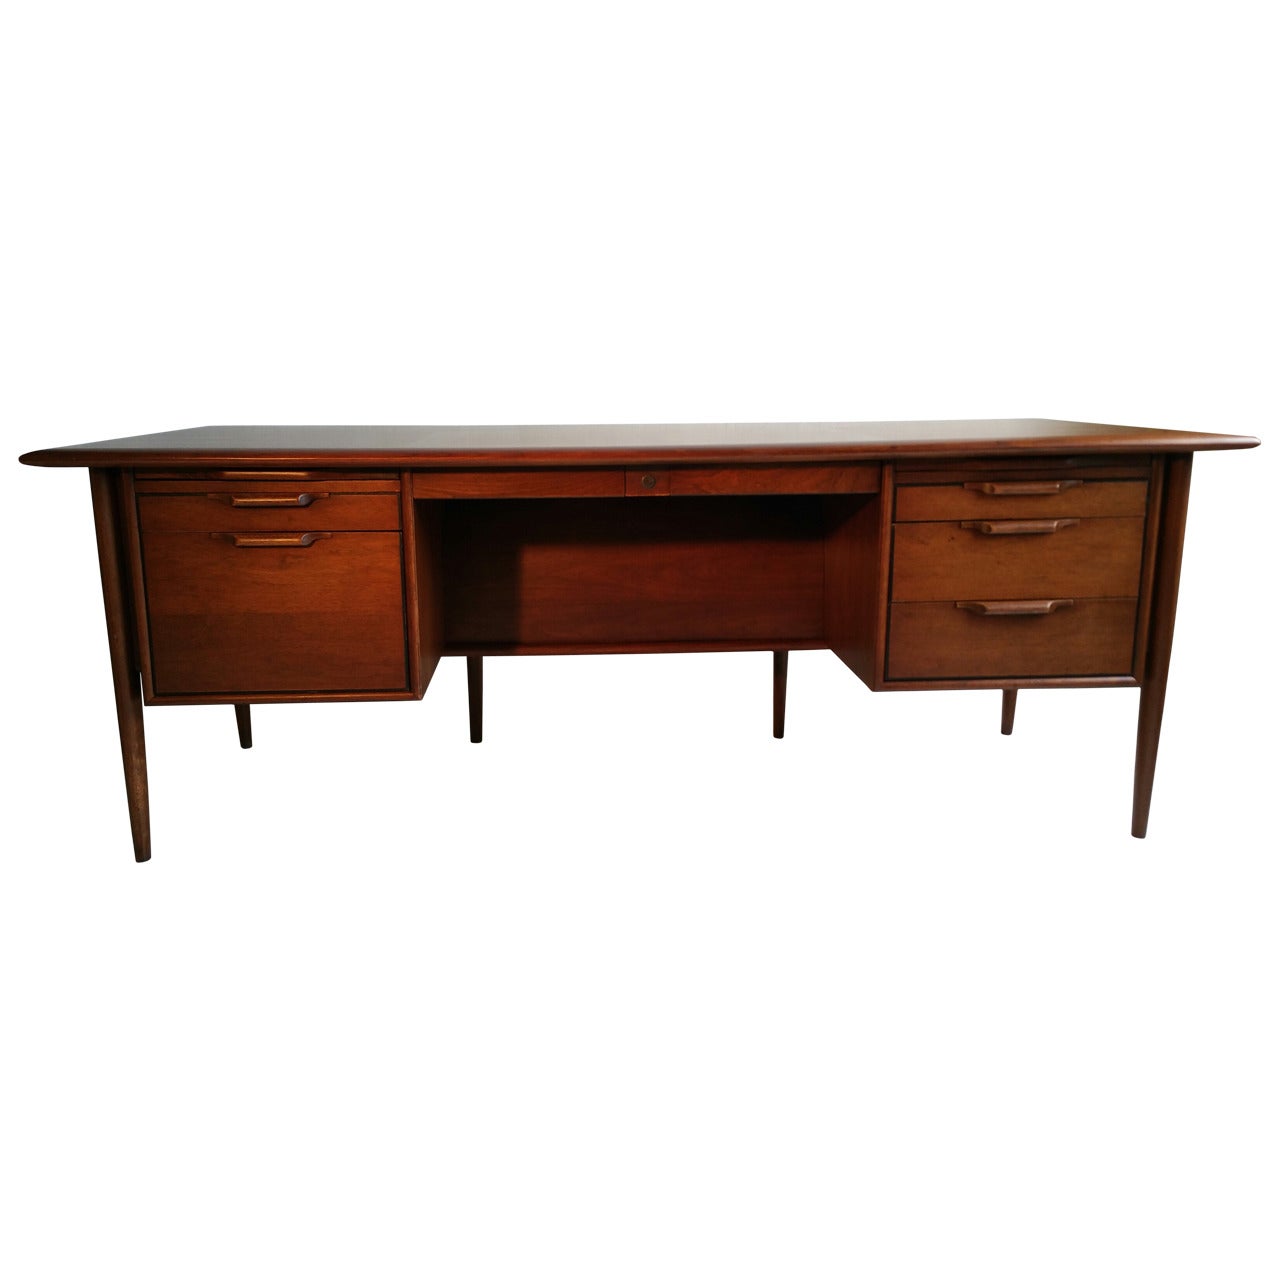 American Danish Executive Desk by Stow Davis in the Manner of Jens Risom